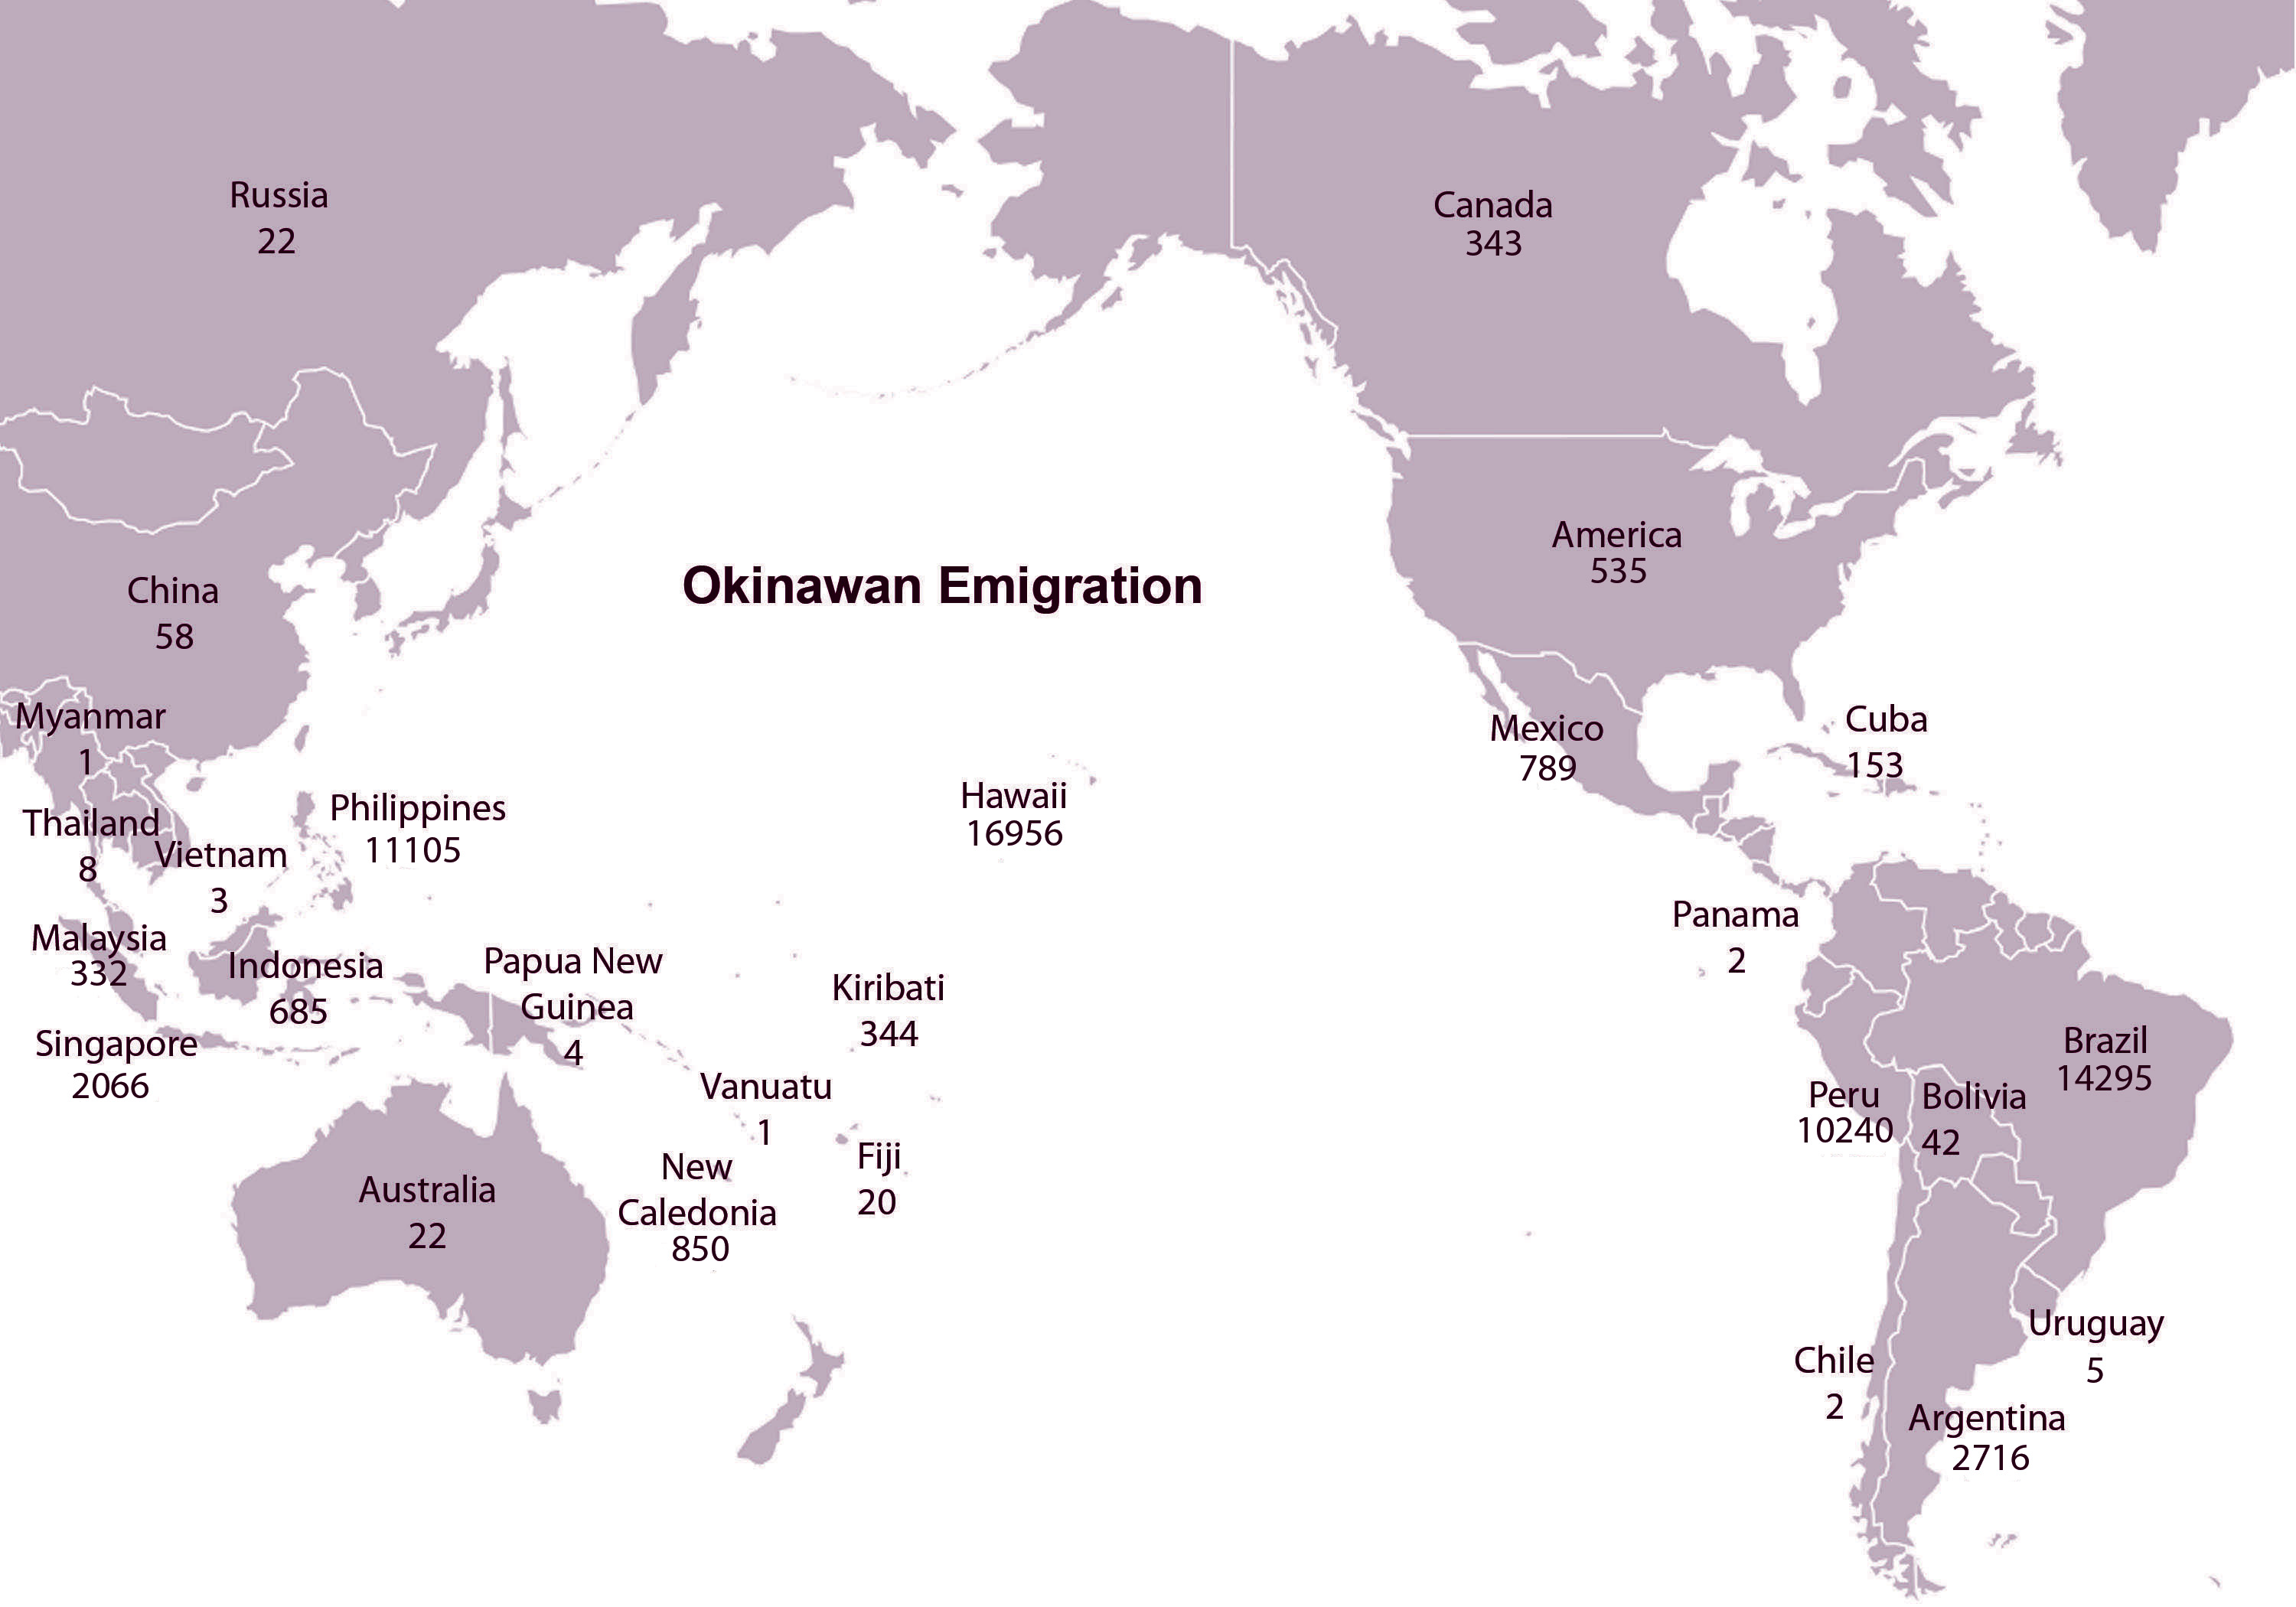 Where in the world did Okinawans emigrate to?